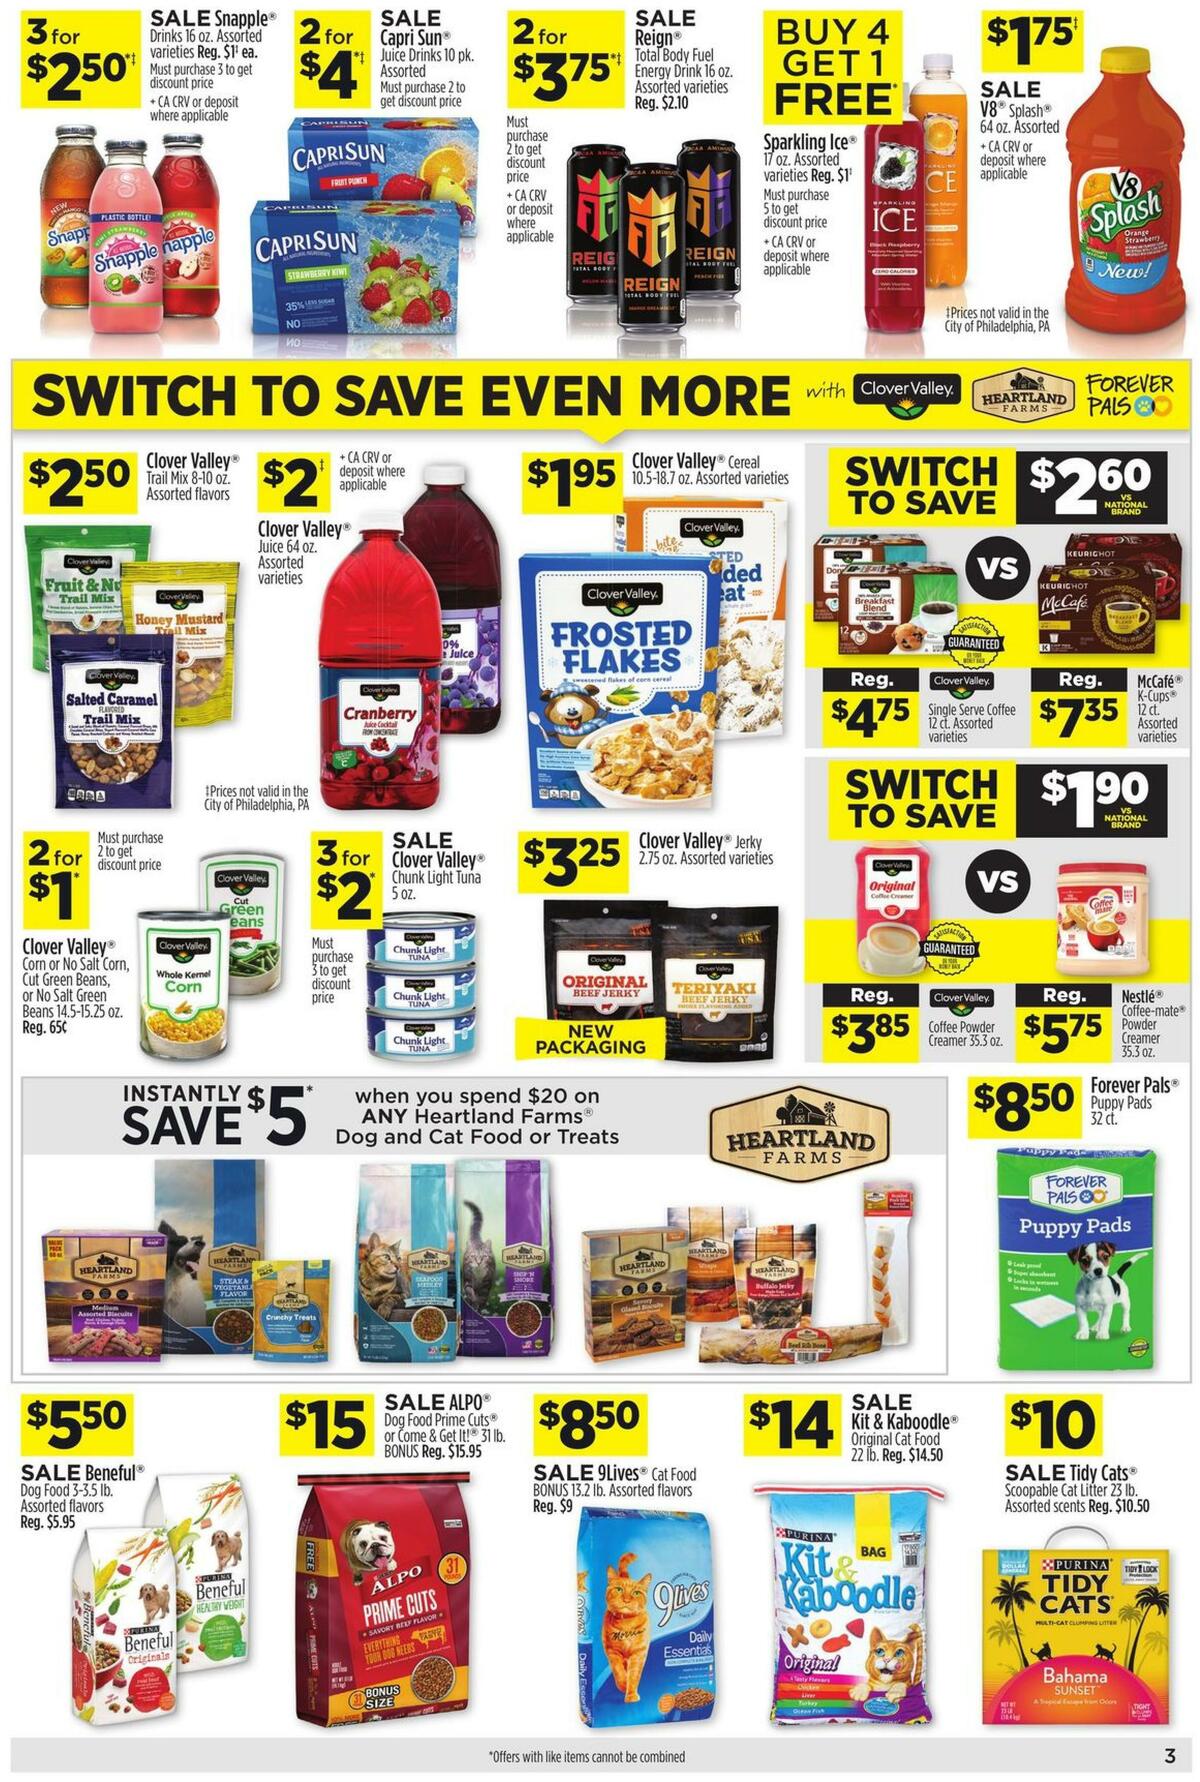 Dollar General Weekly Ad from September 27